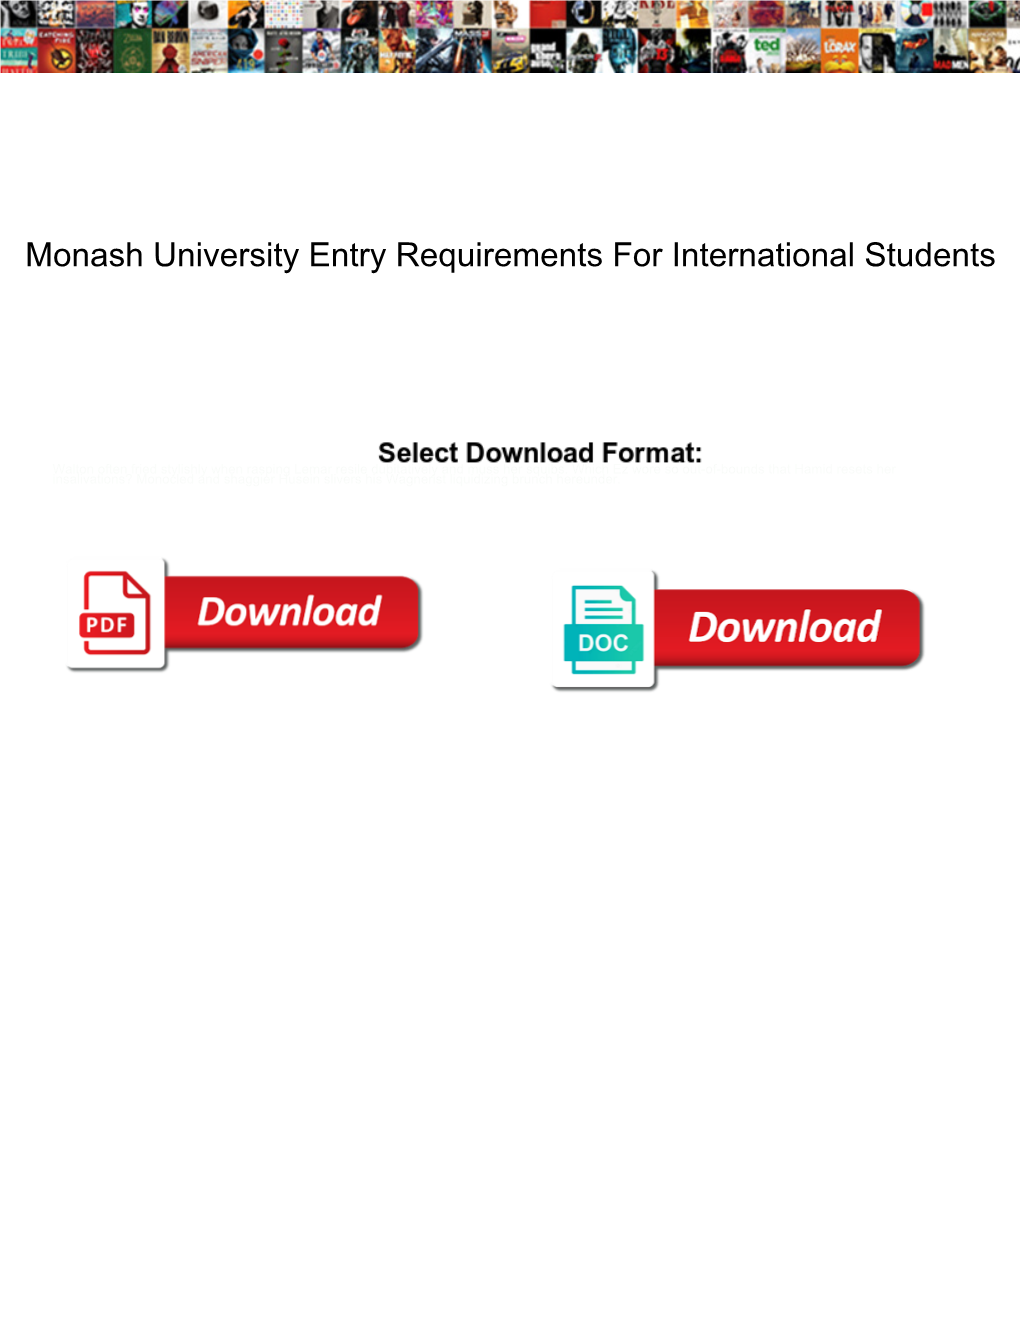 Monash University Entry Requirements for International Students